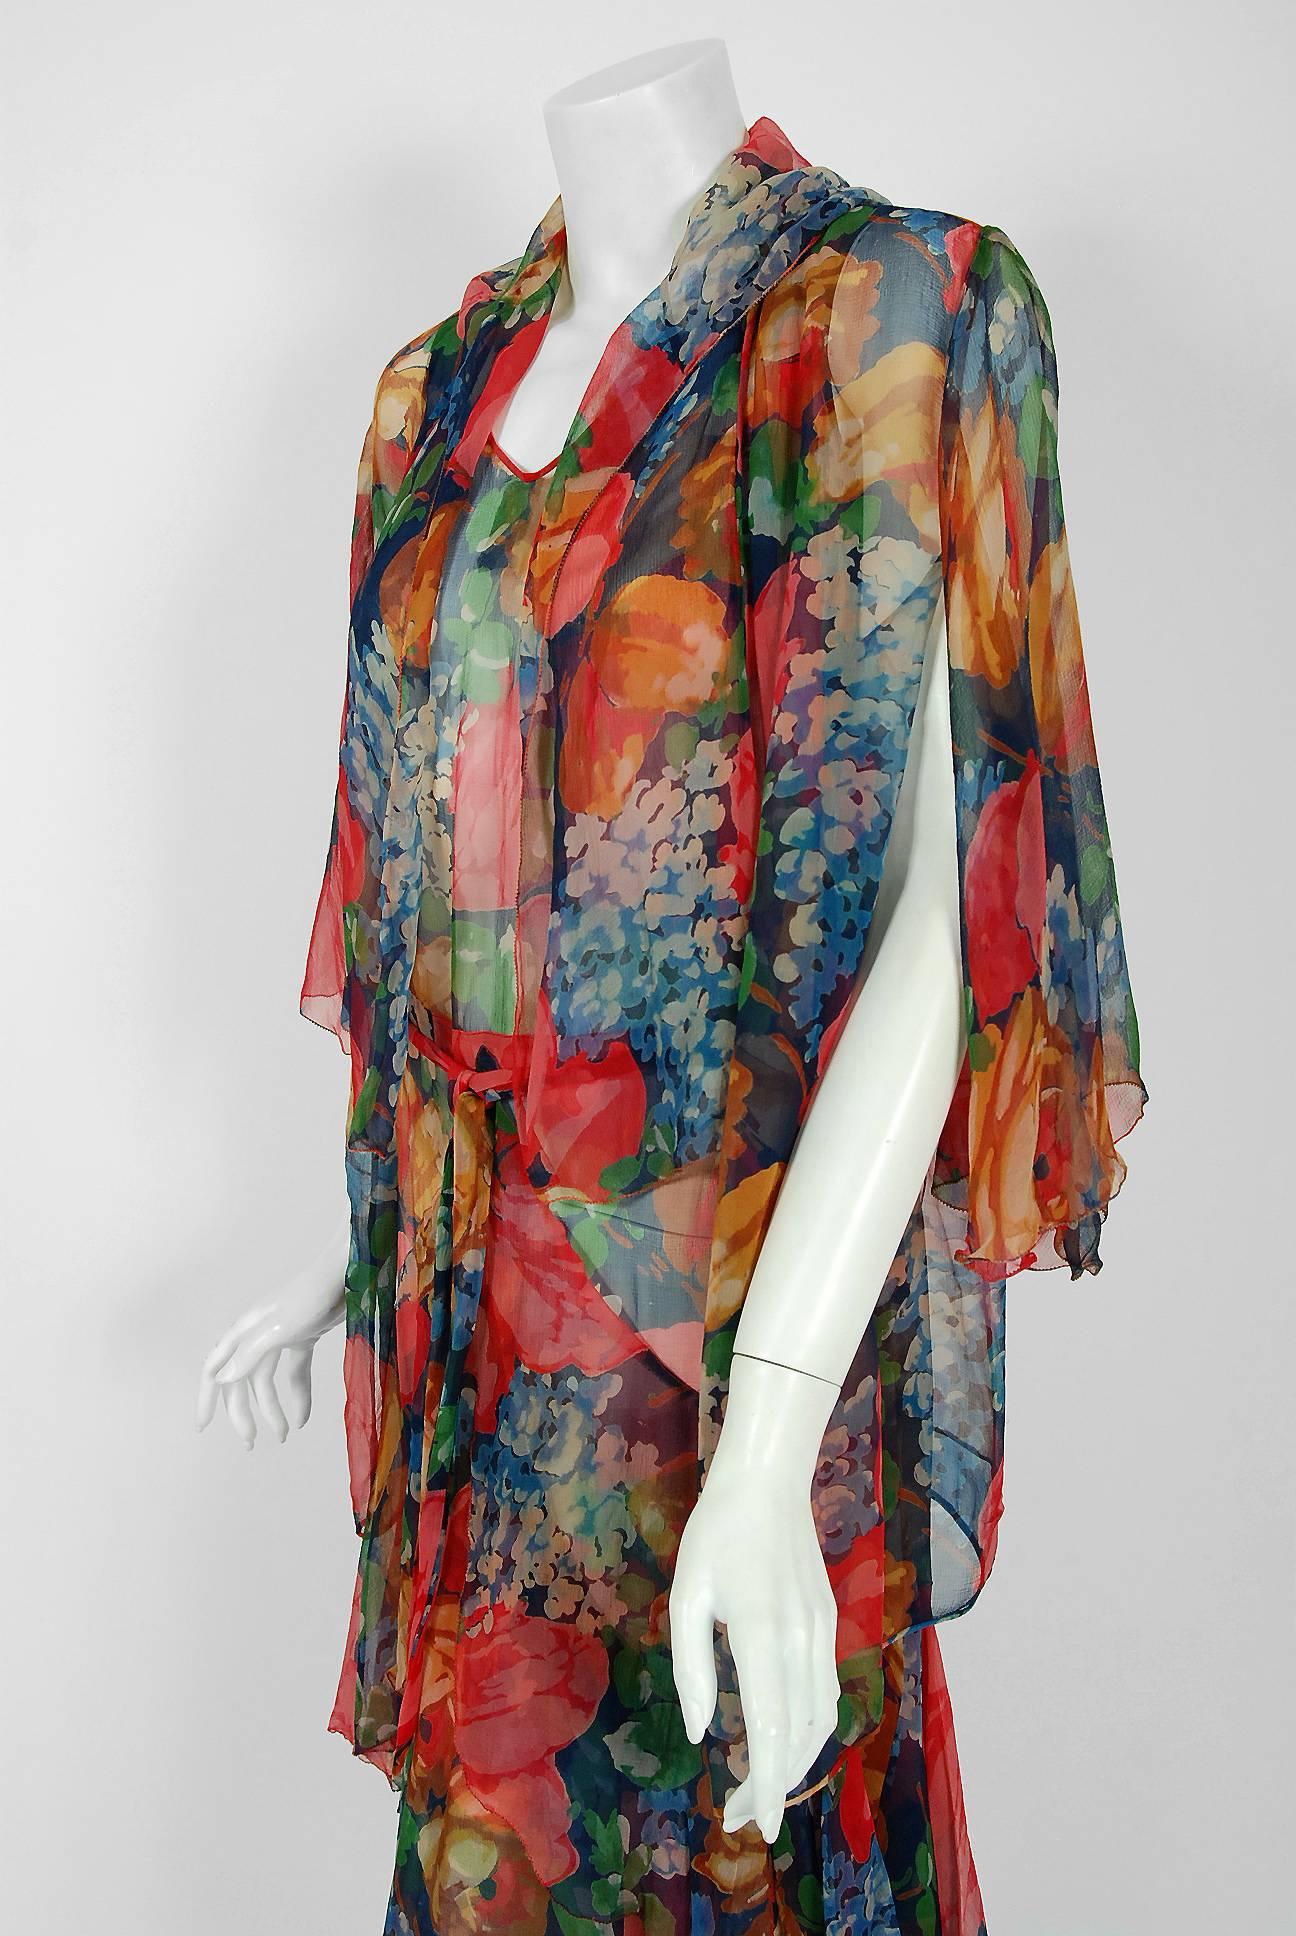 The breathtaking watercolor floral rose-garden print used in this late 1920's silk-chiffon flapper ensemble has a fresh innocence that I find irresistible. The bodice has an elegant sleeveless plunge with smocked shoulders. The matching jacket has